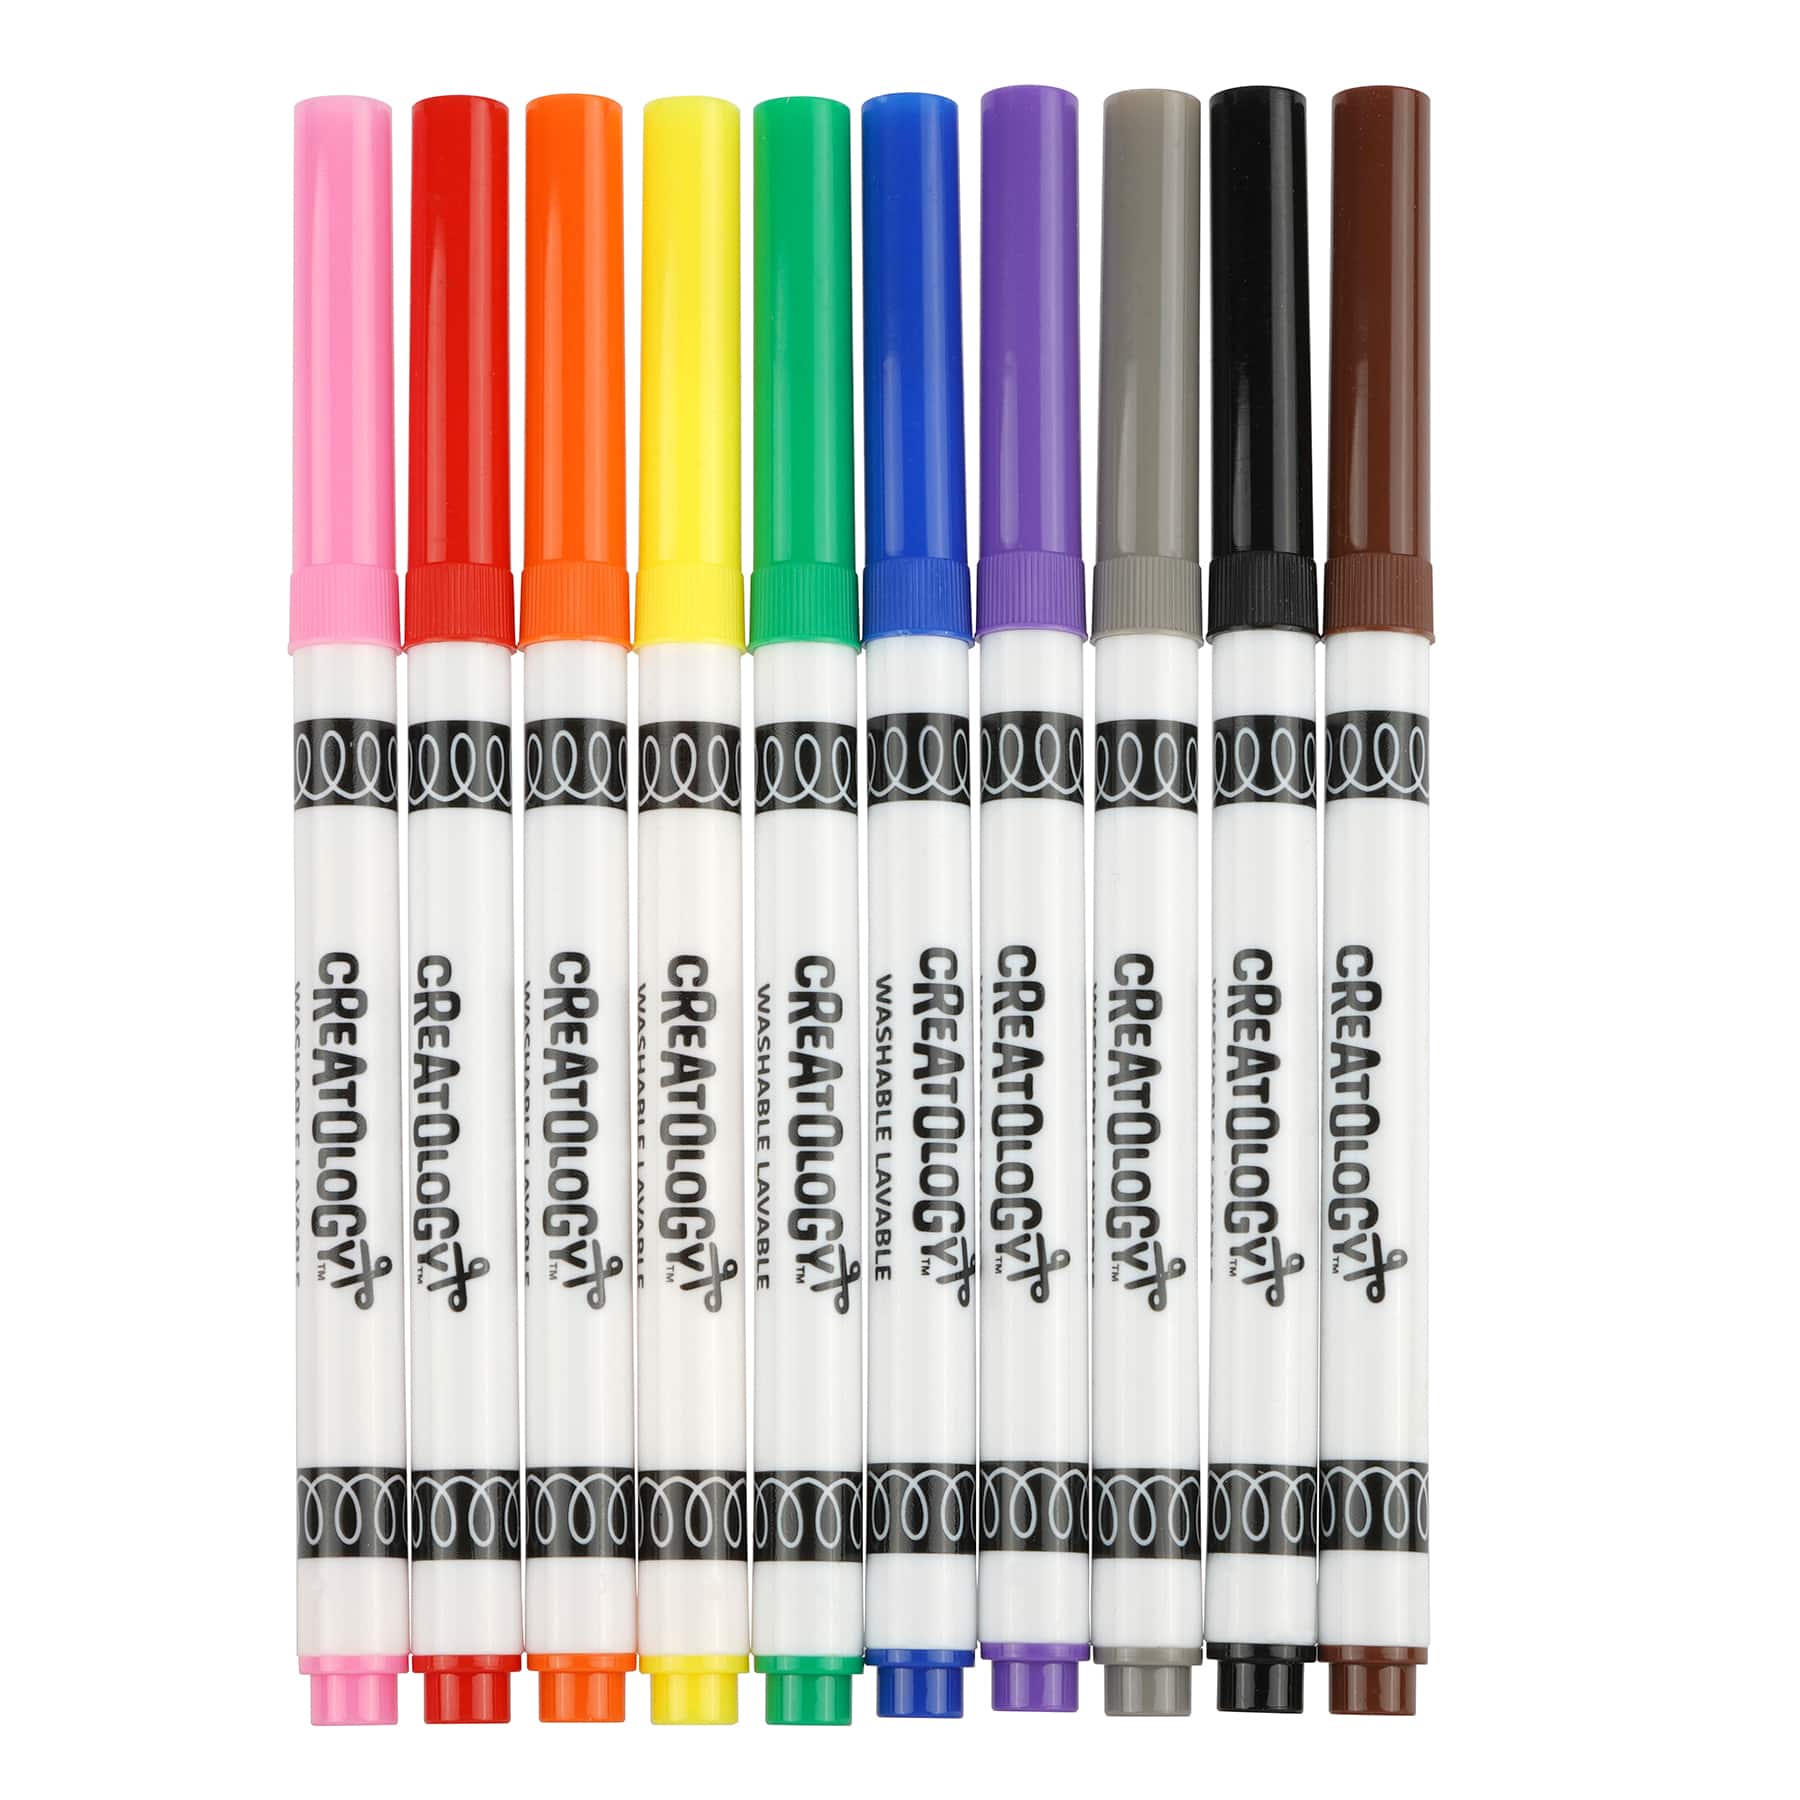 10 Count (120 total) Primary Fine Line Washable Markers by Creatology -  Perfect for Drawing, Coloring, Arts & Crafts - Bulk 12 Pack 